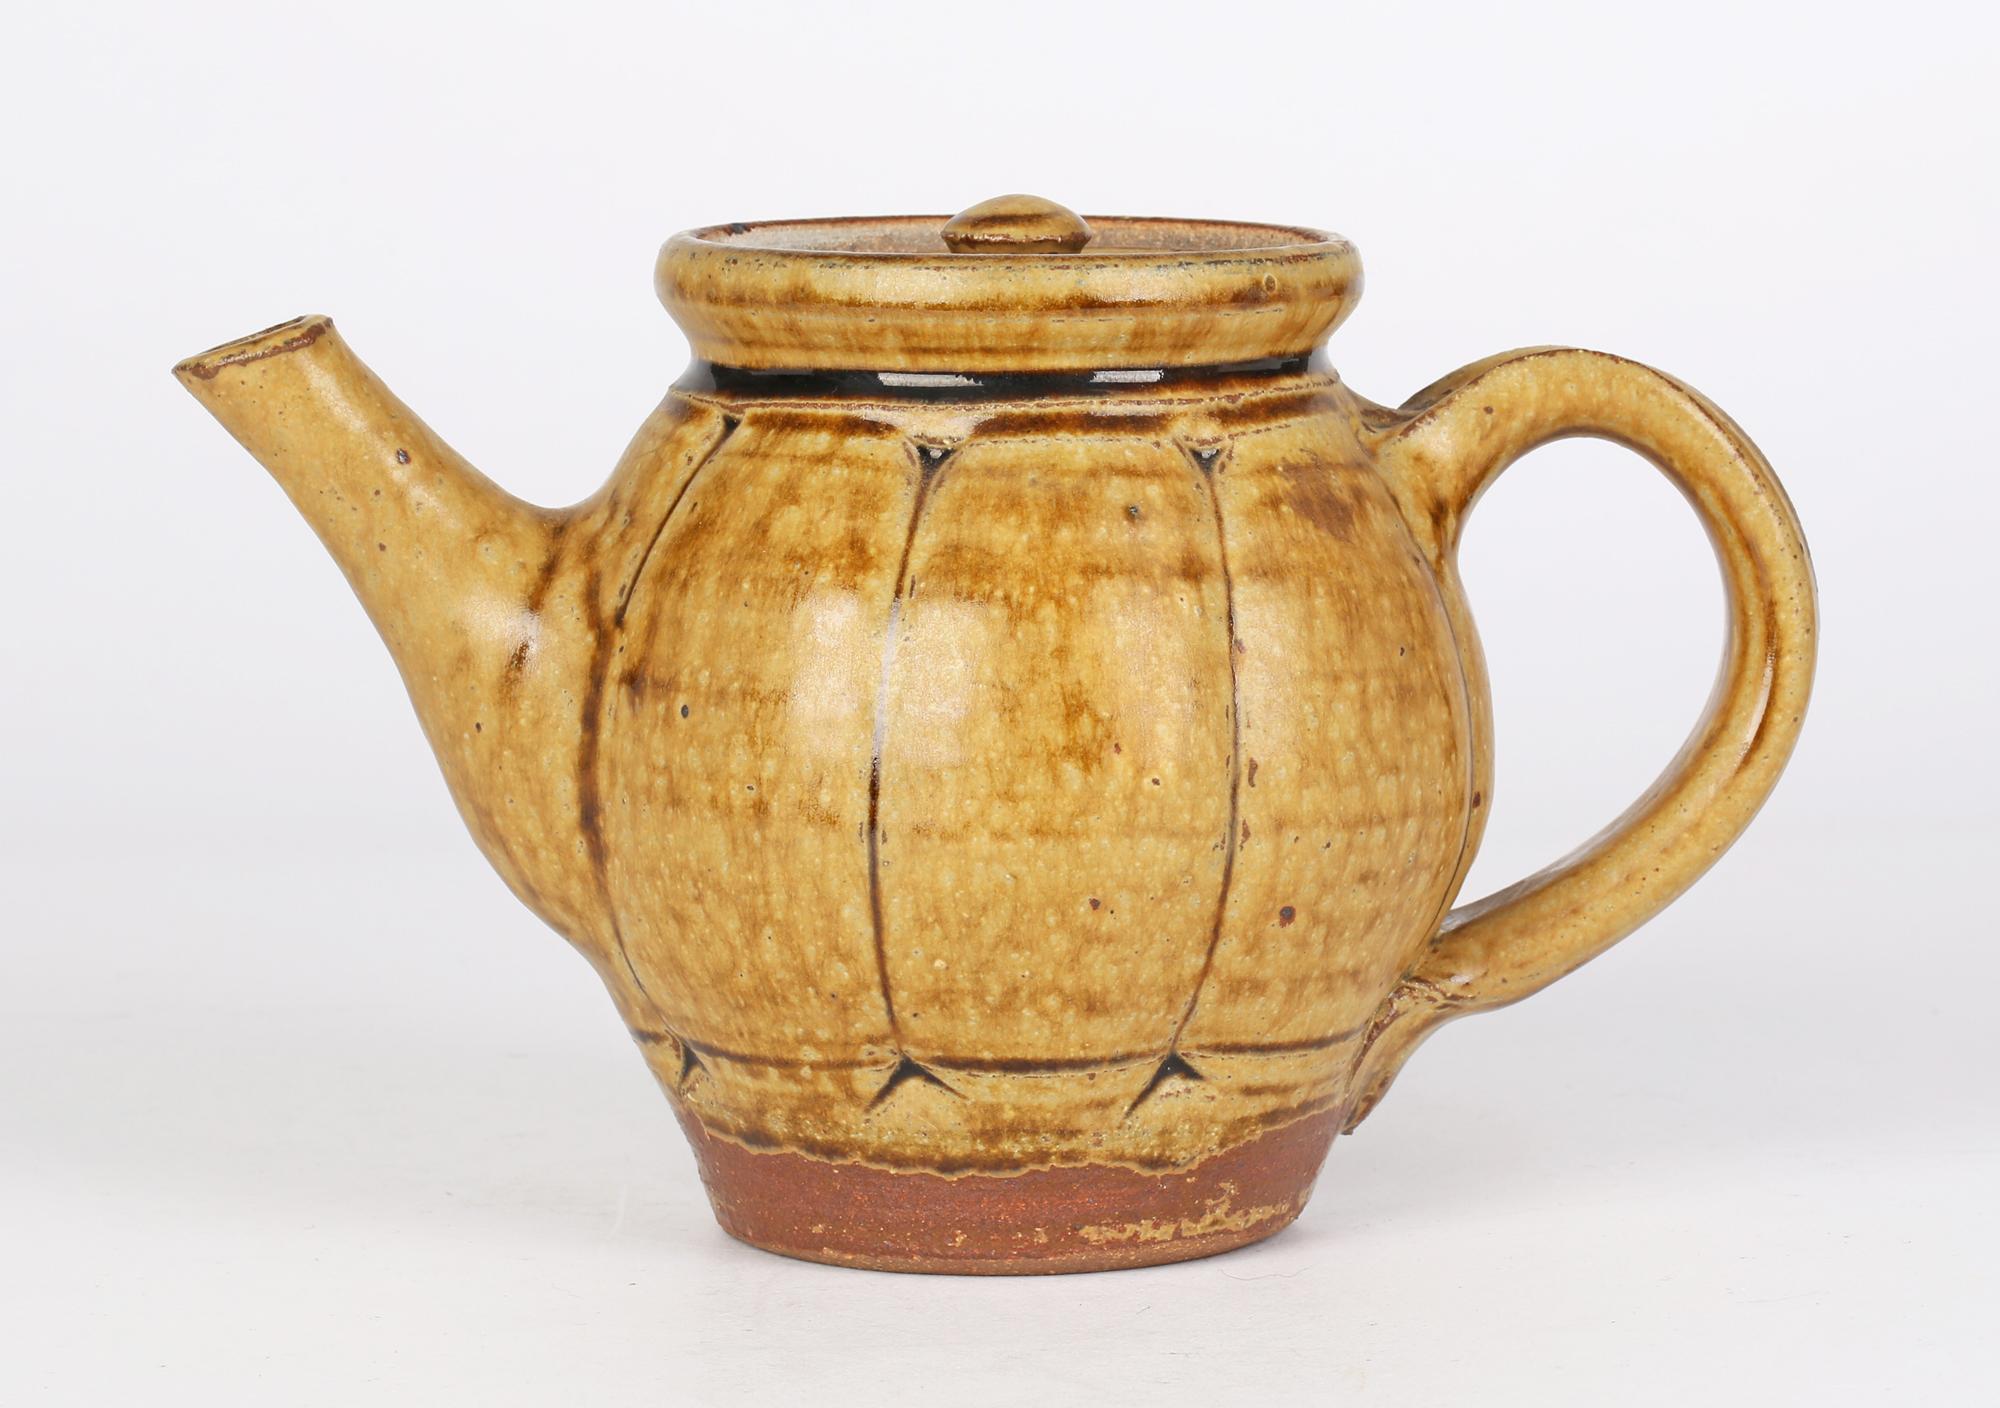 A stylish English studio pottery teapot and cover decorated in brown ash glazes by renowned potter Mike Dodd (English, b. 1943) and dating from the 20th century. The teapot of rounded form has incised panelling around the body with a large loop